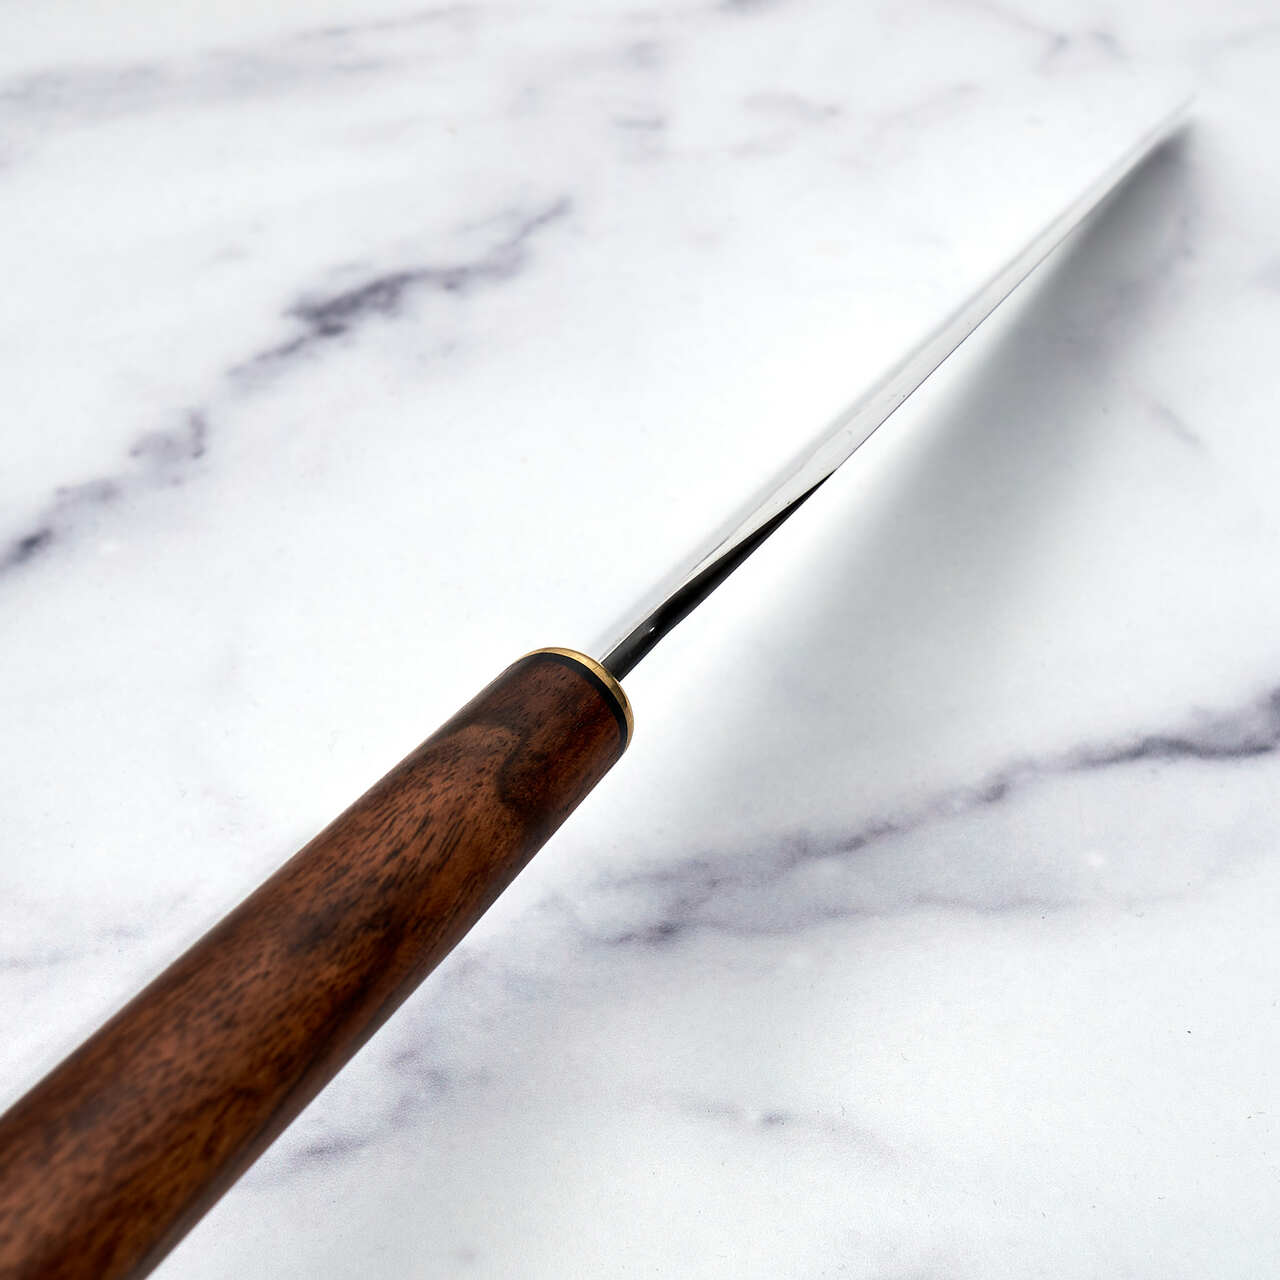 MCX K-Tip Gyuto 250mm 26c3 Limited Release by Fredrik Spåre - 2nd Edition - Choil